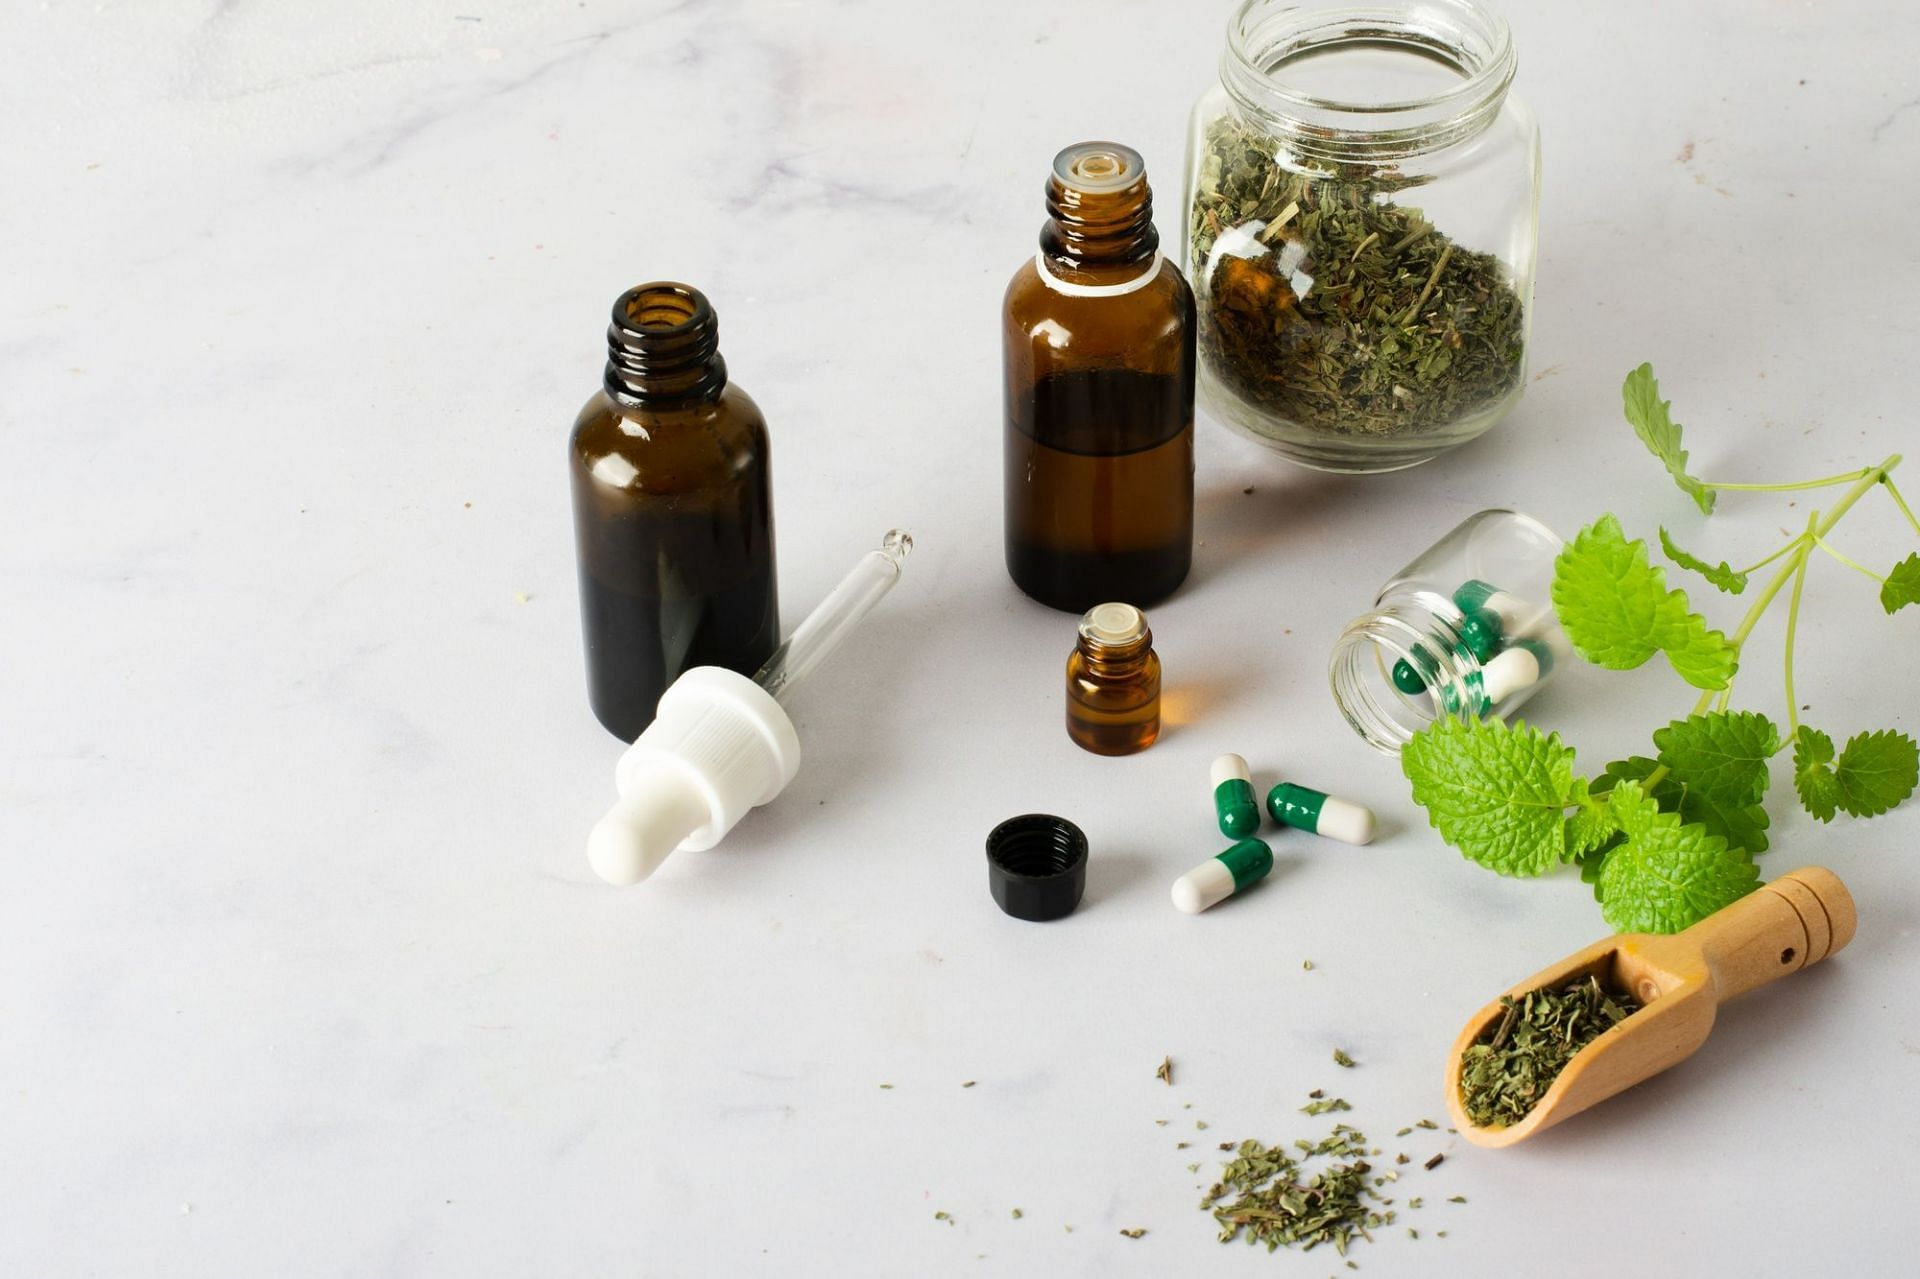 The baby may be at risk as some of the herbal extracts in the supplements may interfere or have some reaction causing trouble to the baby(Image by Freepik on Freepik)